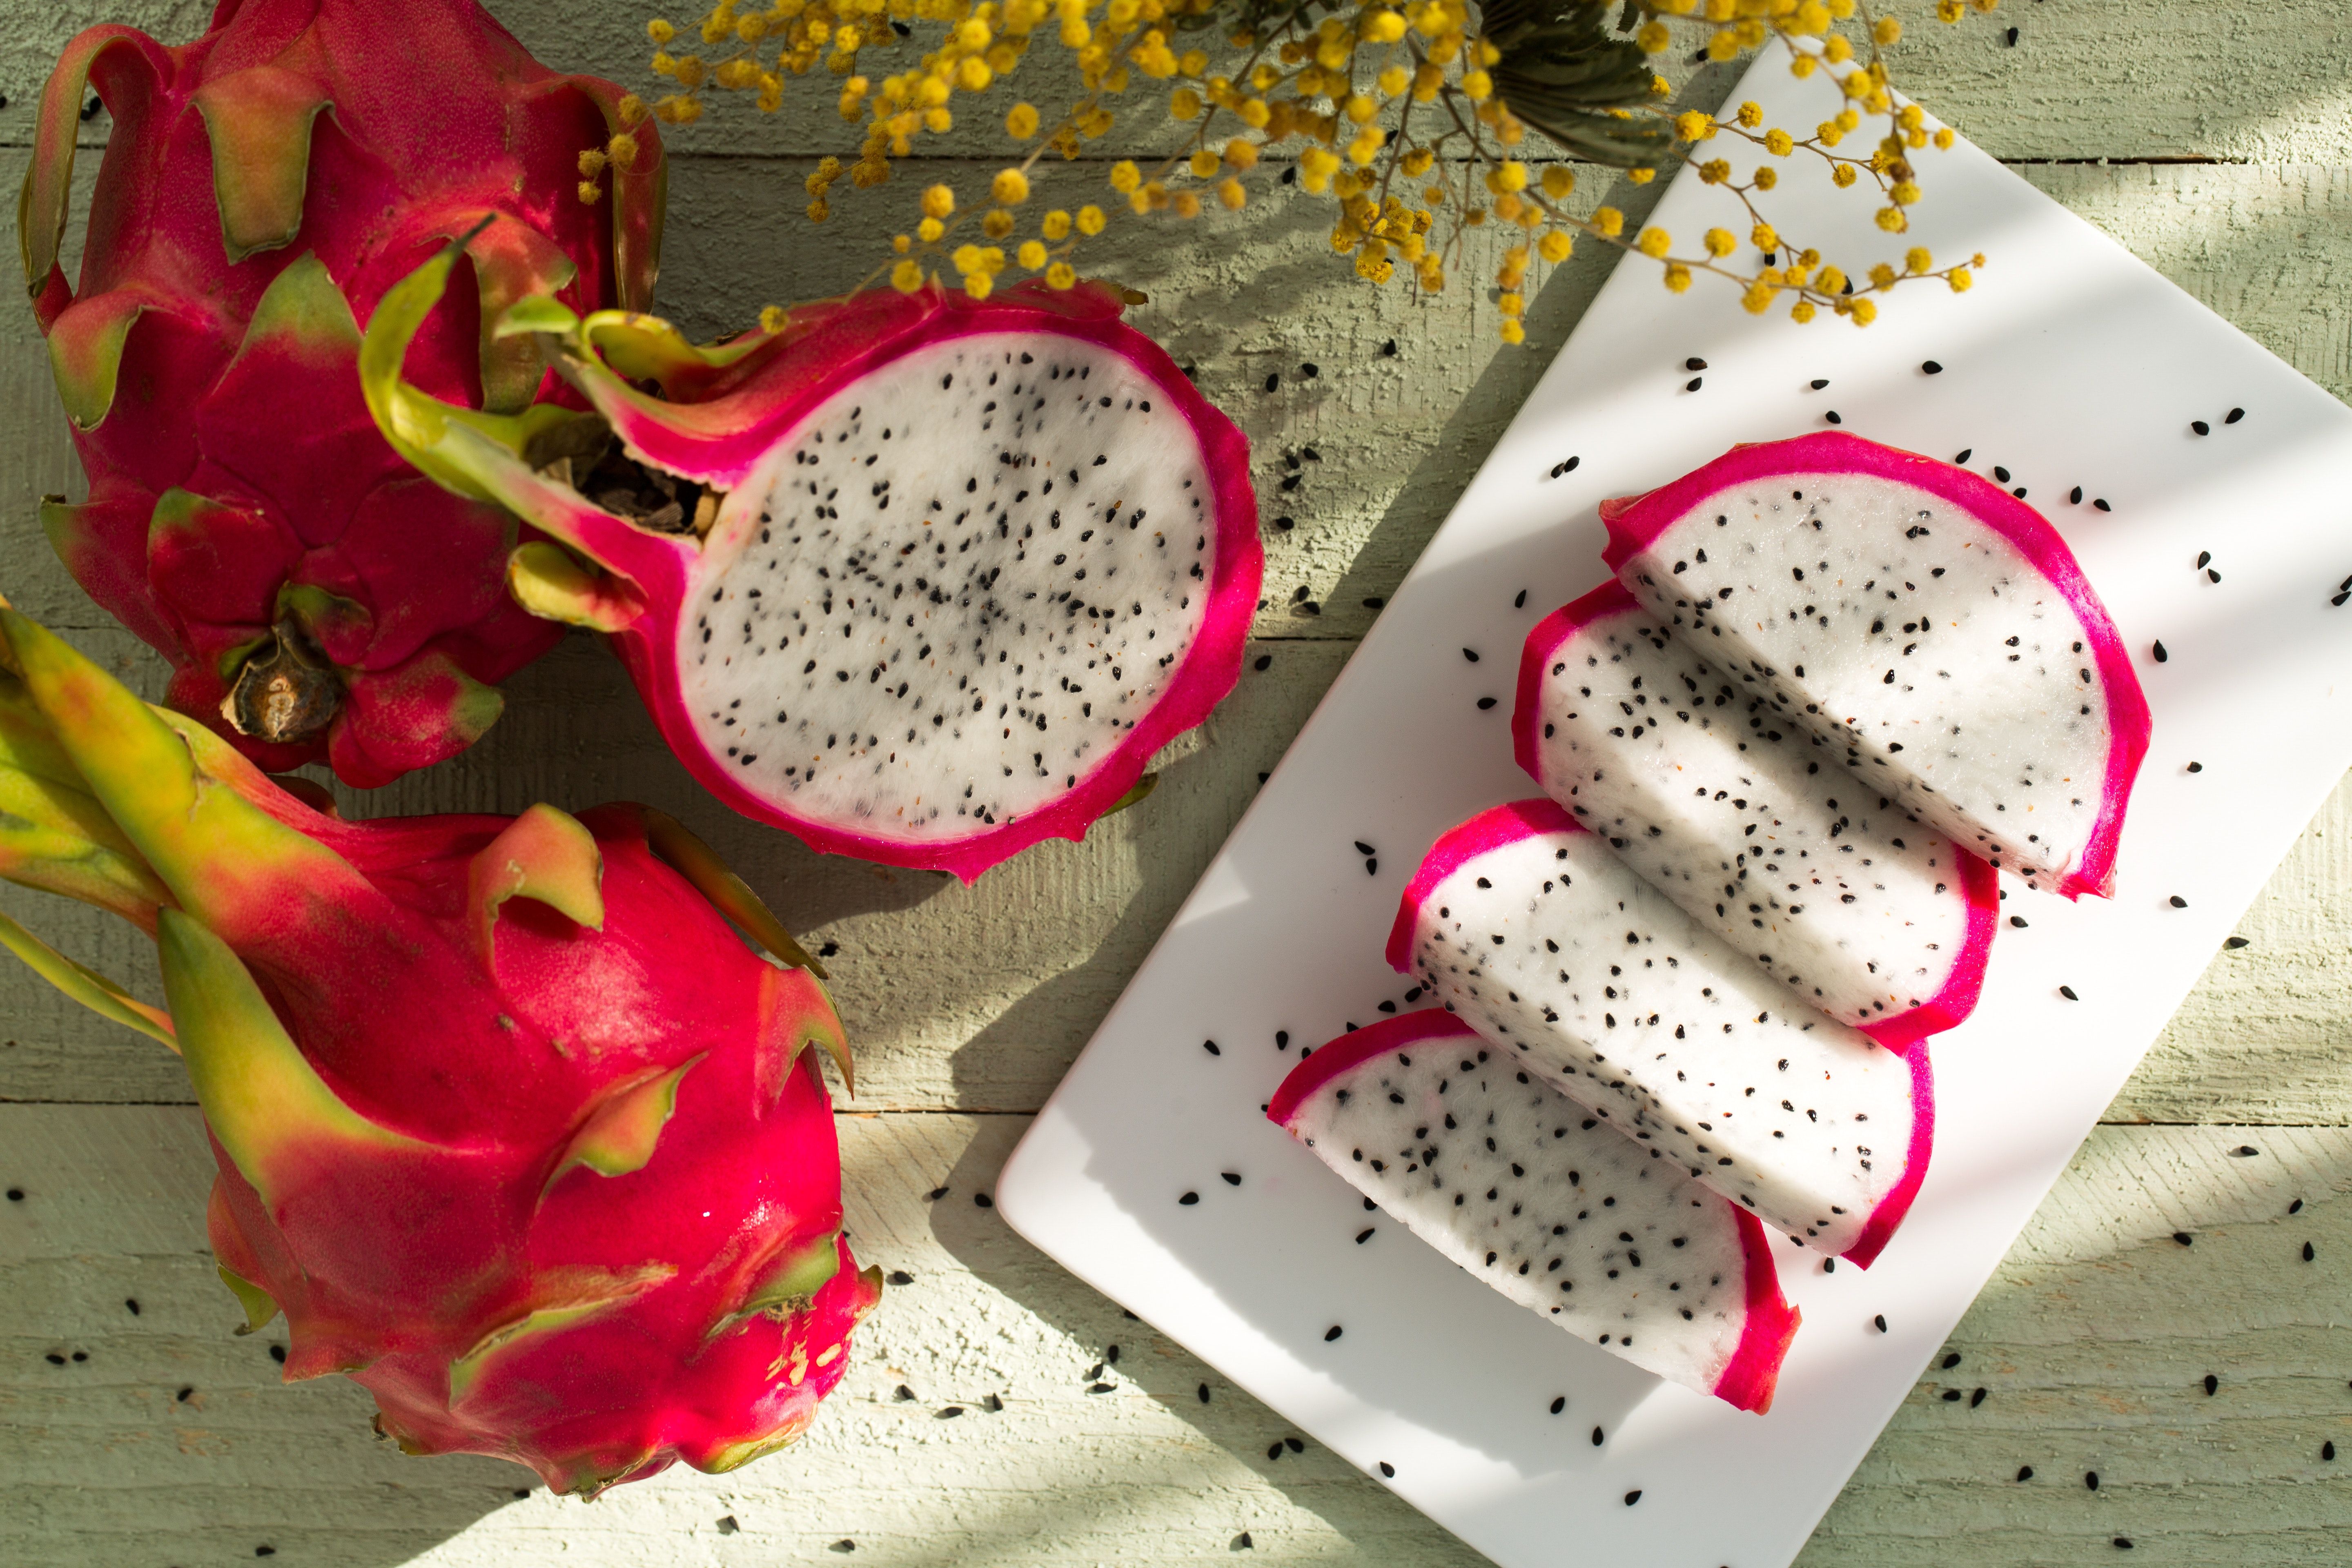 A dragon fruit is sitting on the table - Fruit